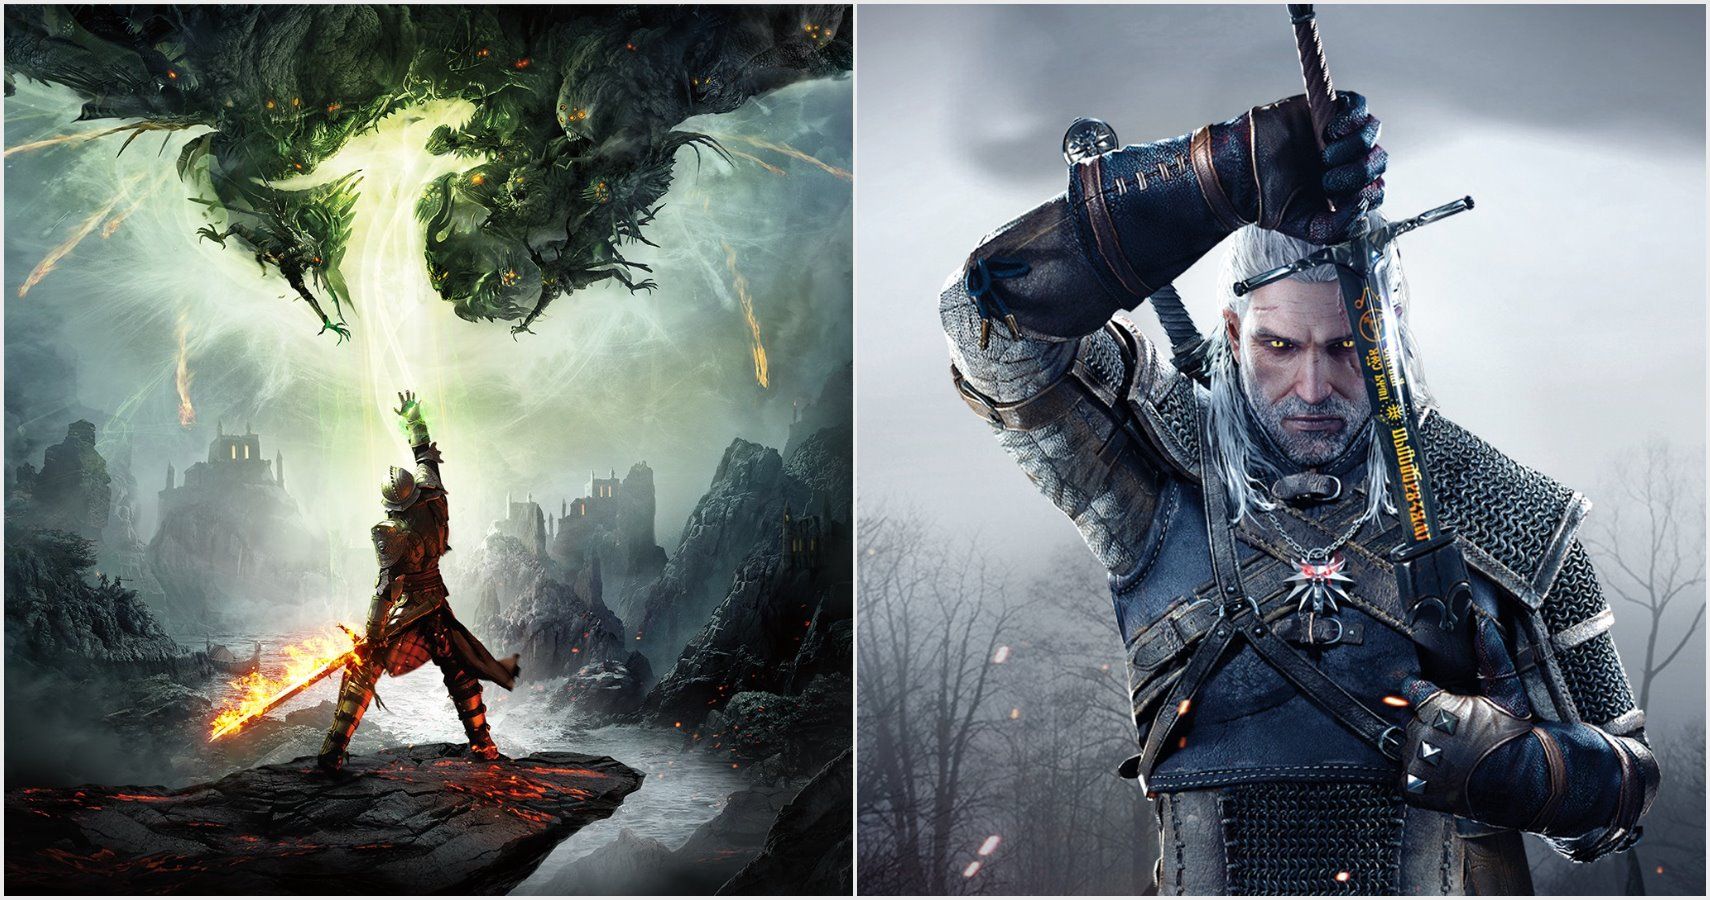 5 Things Dragon Age Does Better Than The Witcher 5 The Witcher Does